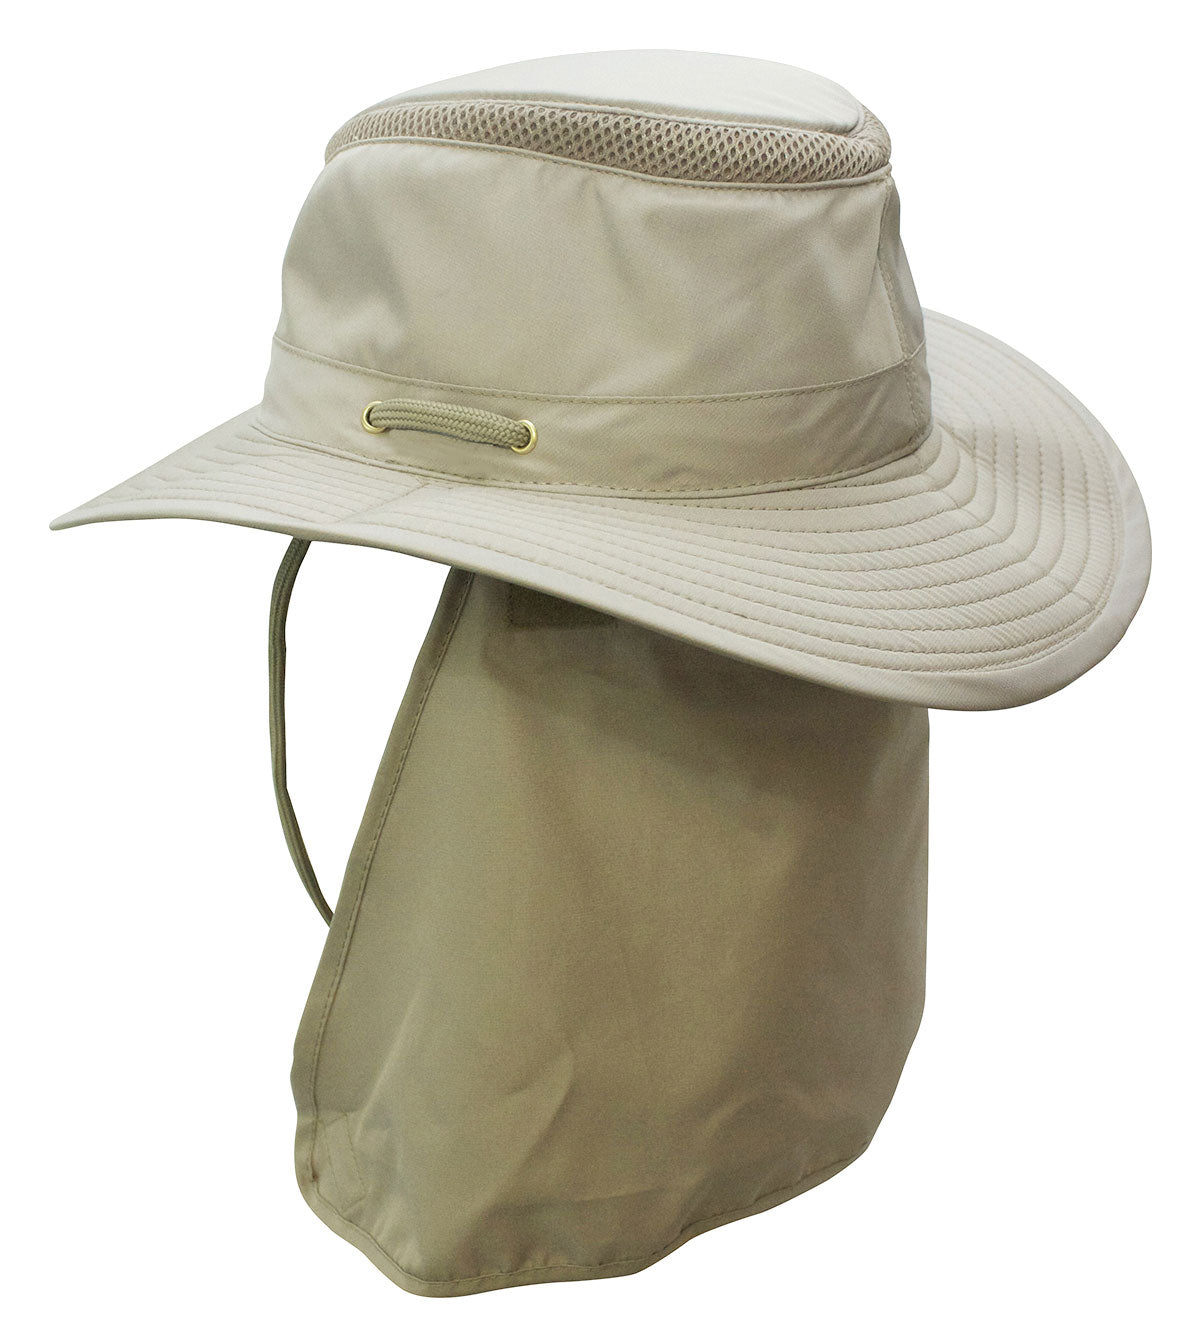 Boating or sailing hat with sun shield and chin cord